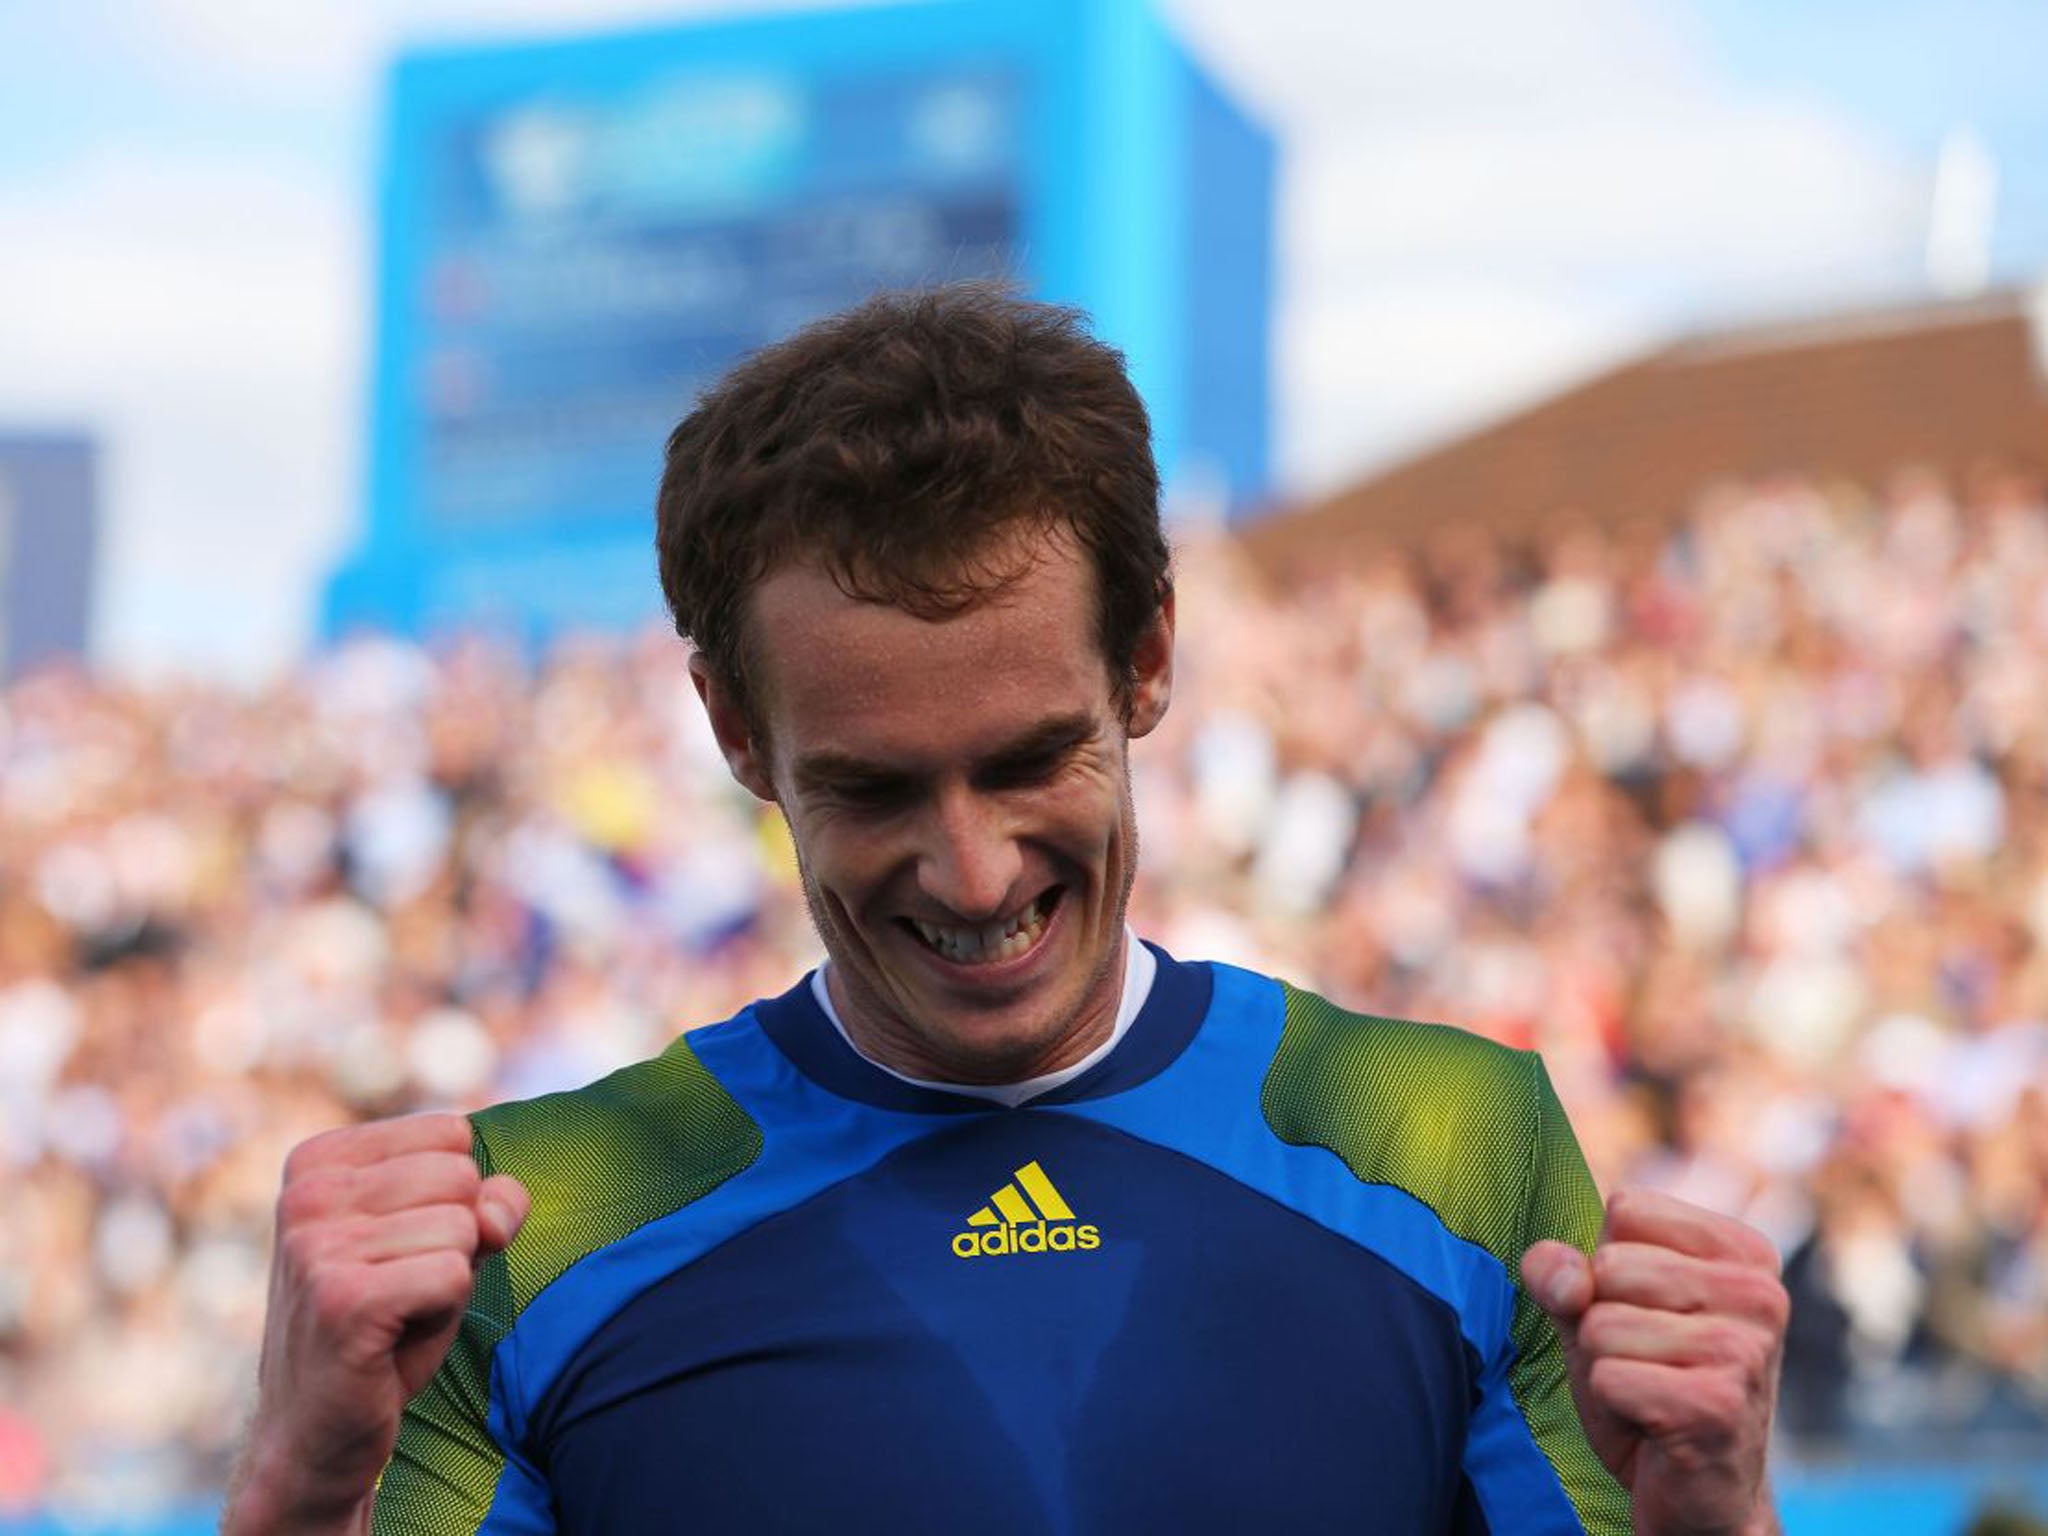 Andy Murray celebrates after clinching a come-from-behind victory, having lost the first set (Julian Finney/Getty Images)